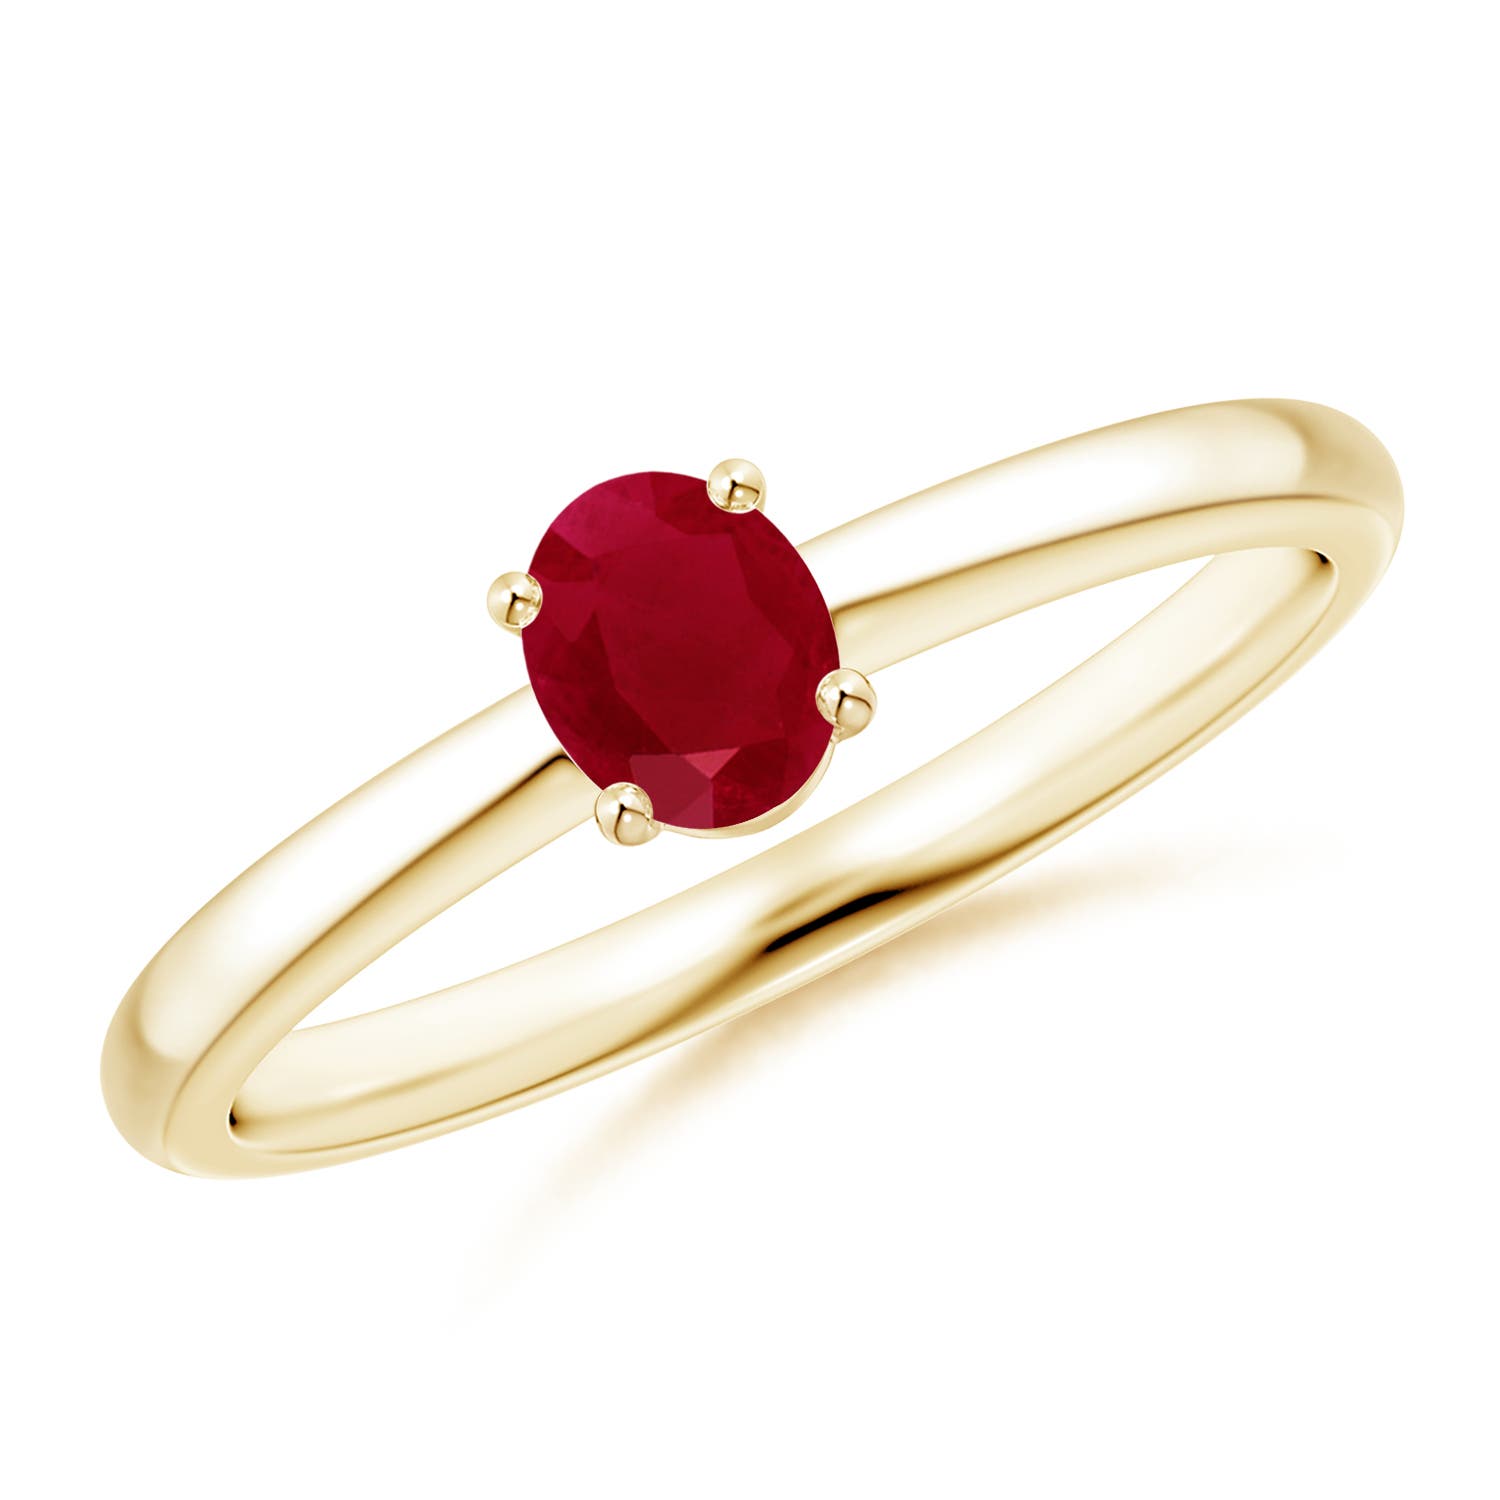 AA - Ruby / 0.4 CT / 14 KT Yellow Gold